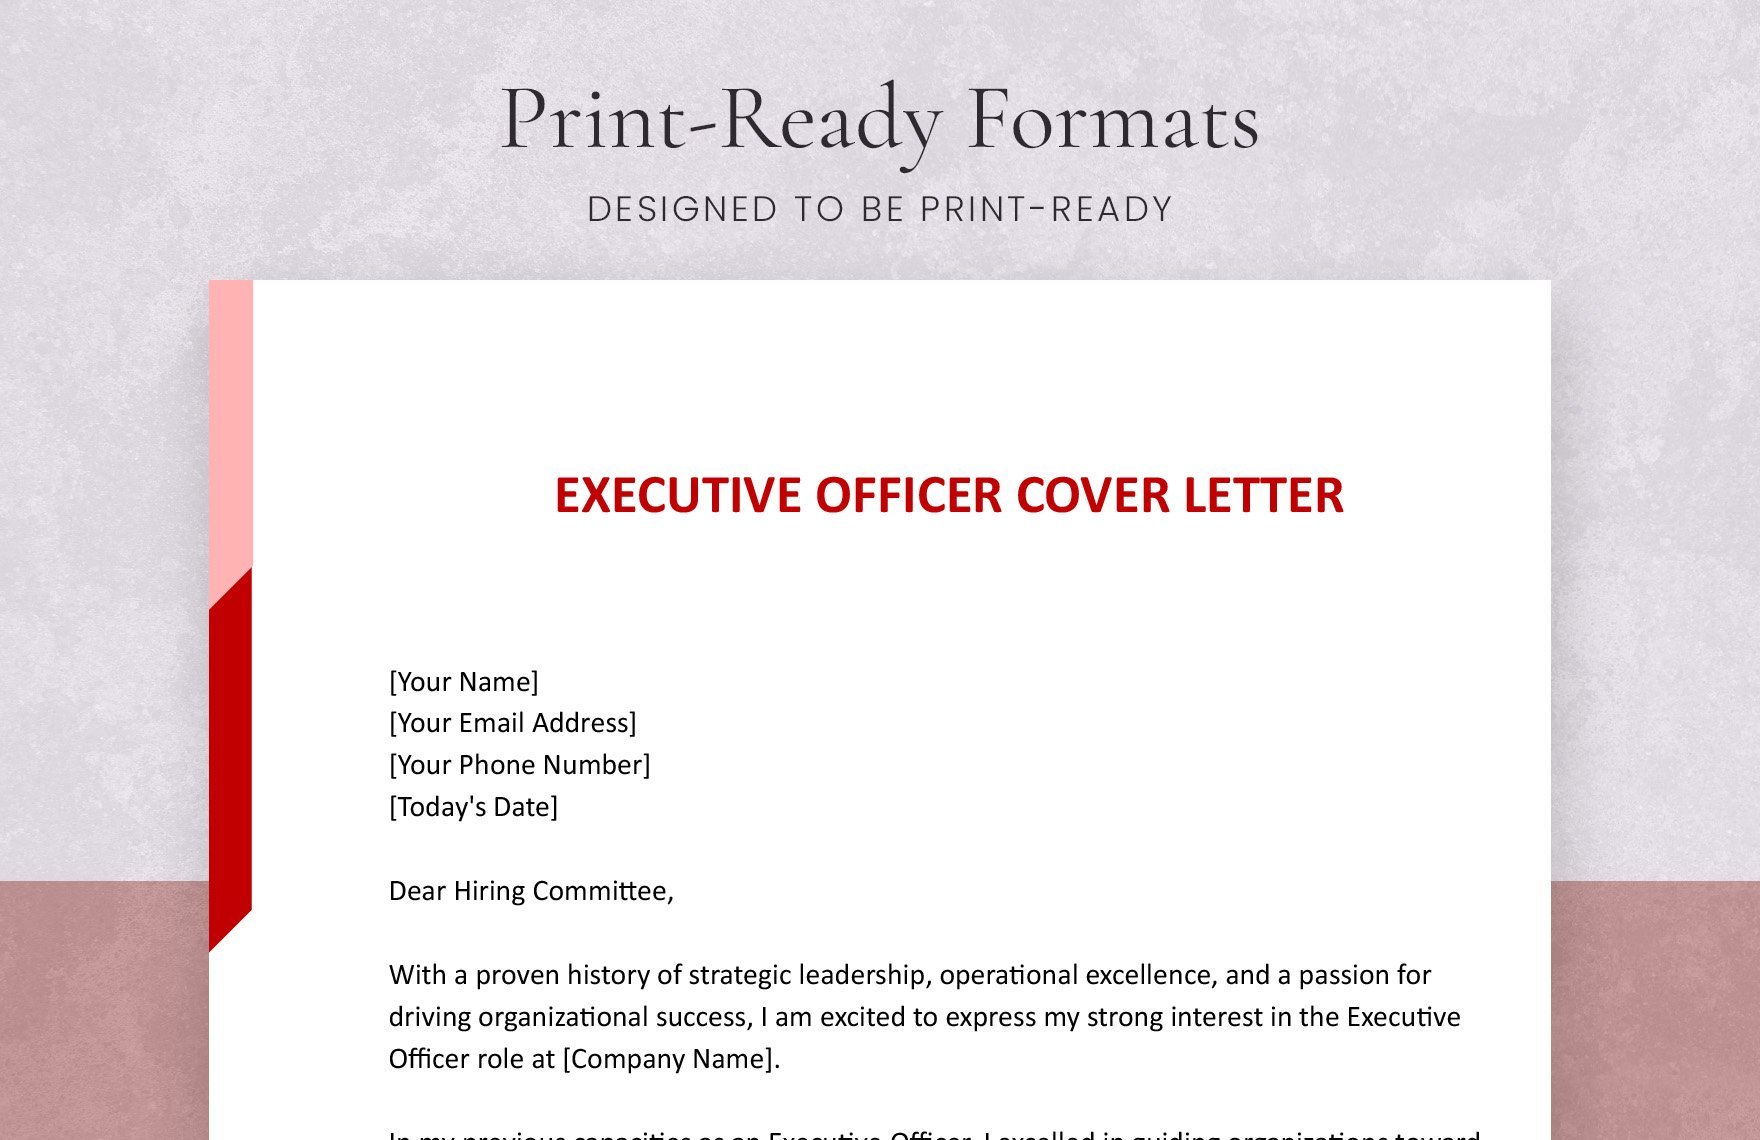 Executive Officer Cover Letter